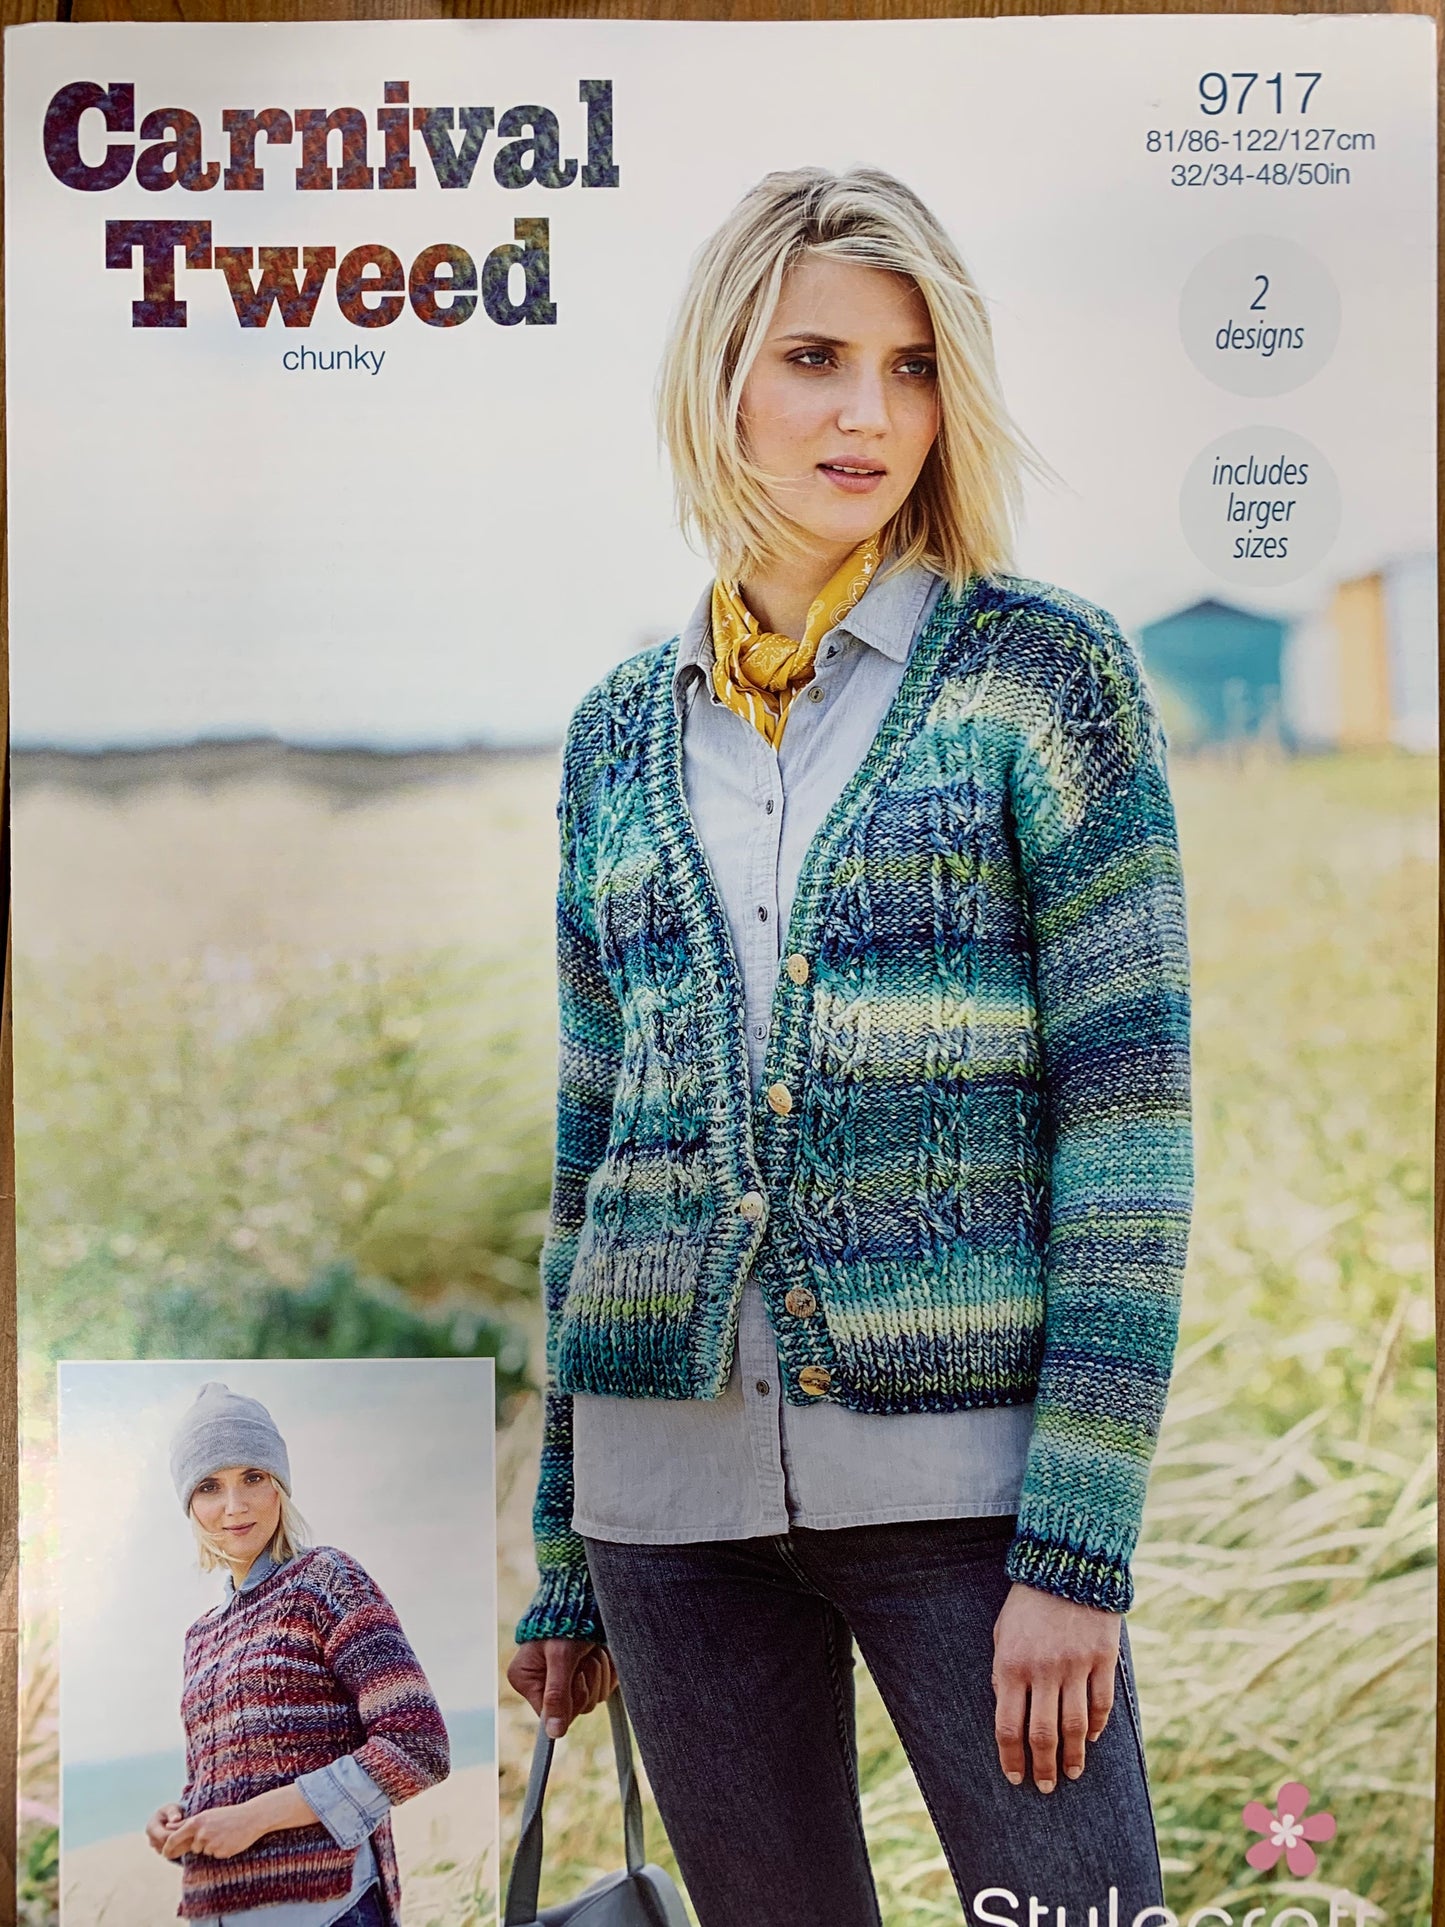 9717 Stylecraft Carnival Tweed chunky ladies cardigan and sweater knitting pattern